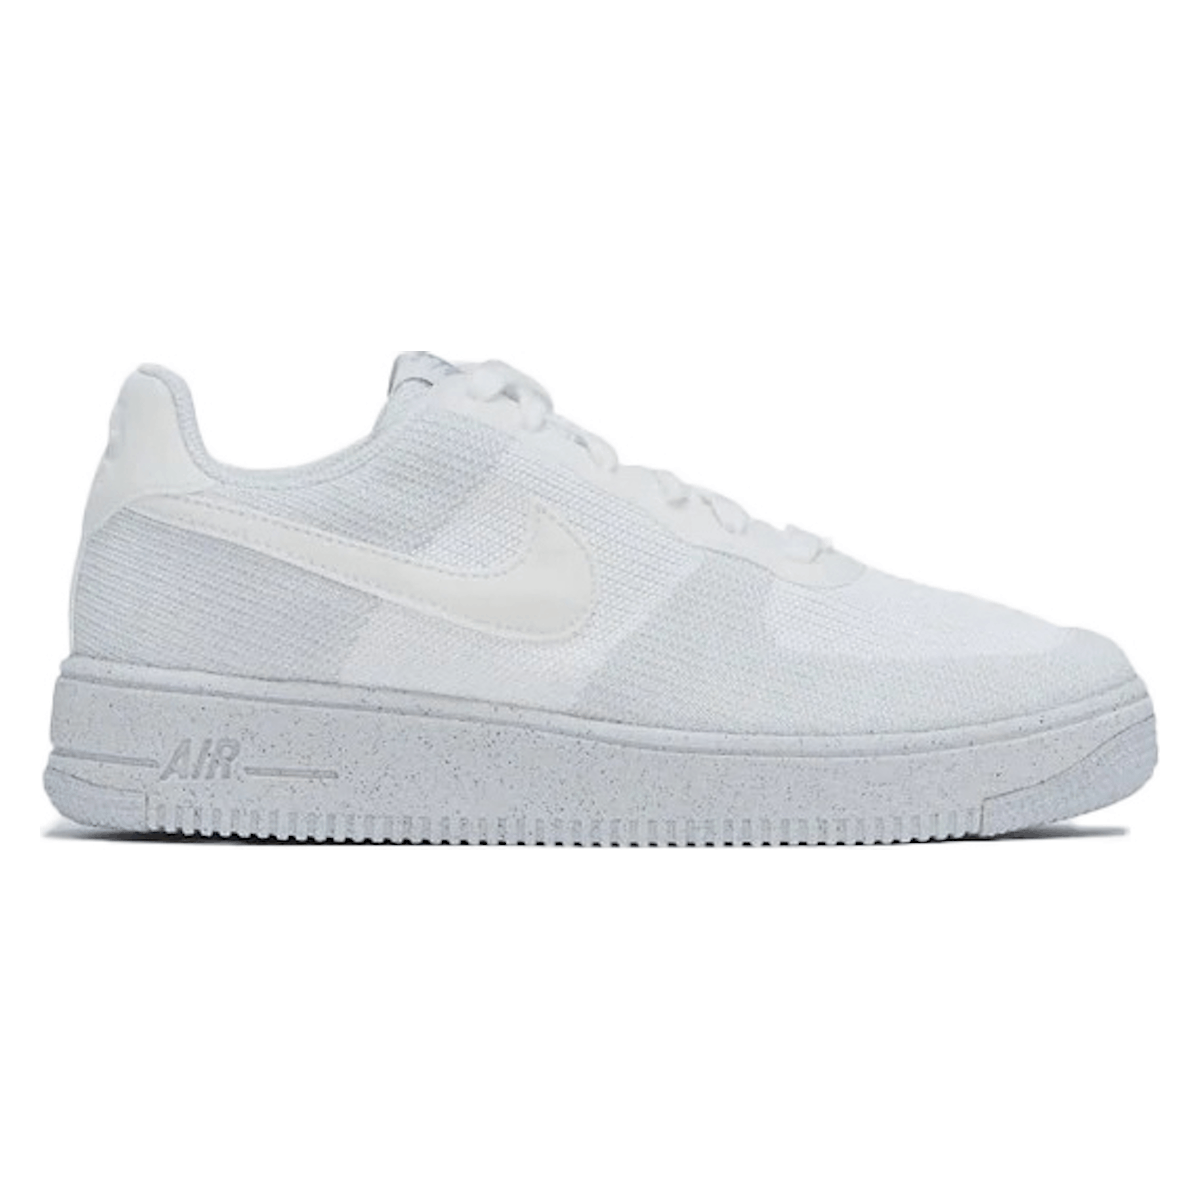 Nike Air Force 1 Crater Low White Sail Grey (GS)